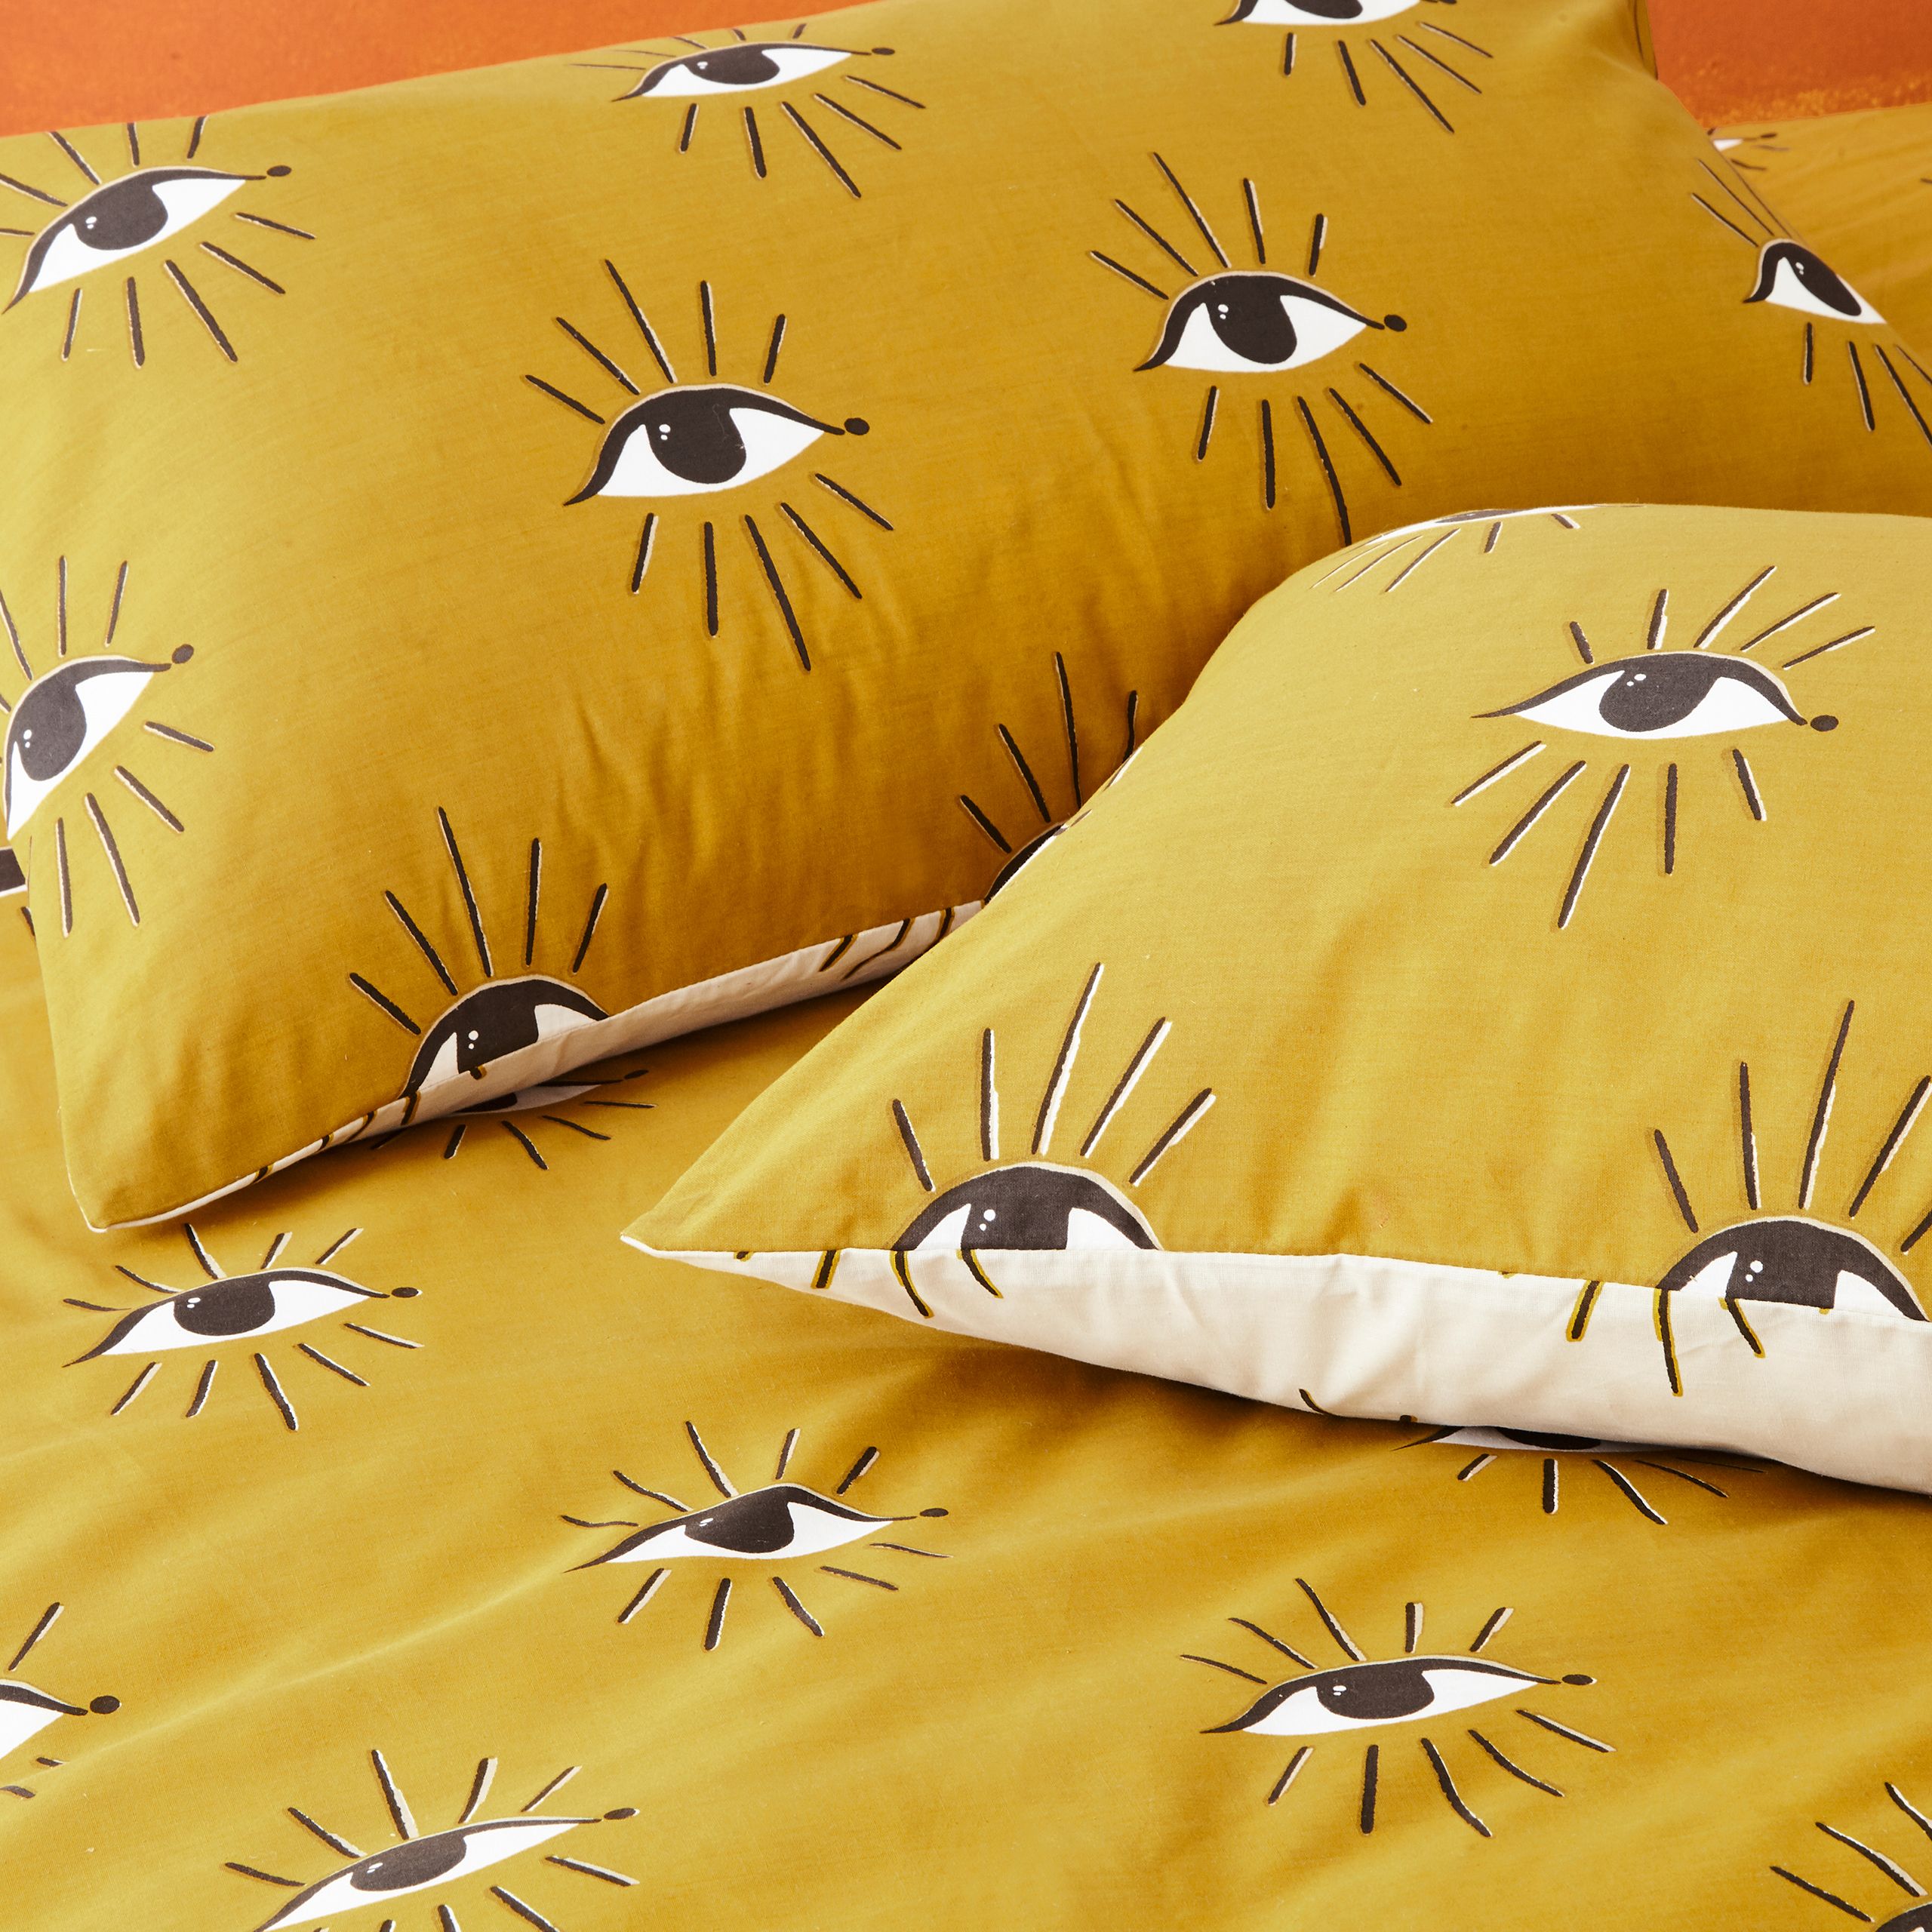 Add instant personality into your bedroom with this bold duvet set, featuring mystical watching eyes design. This has a neutral reversible design so you can switch the look when you need to.